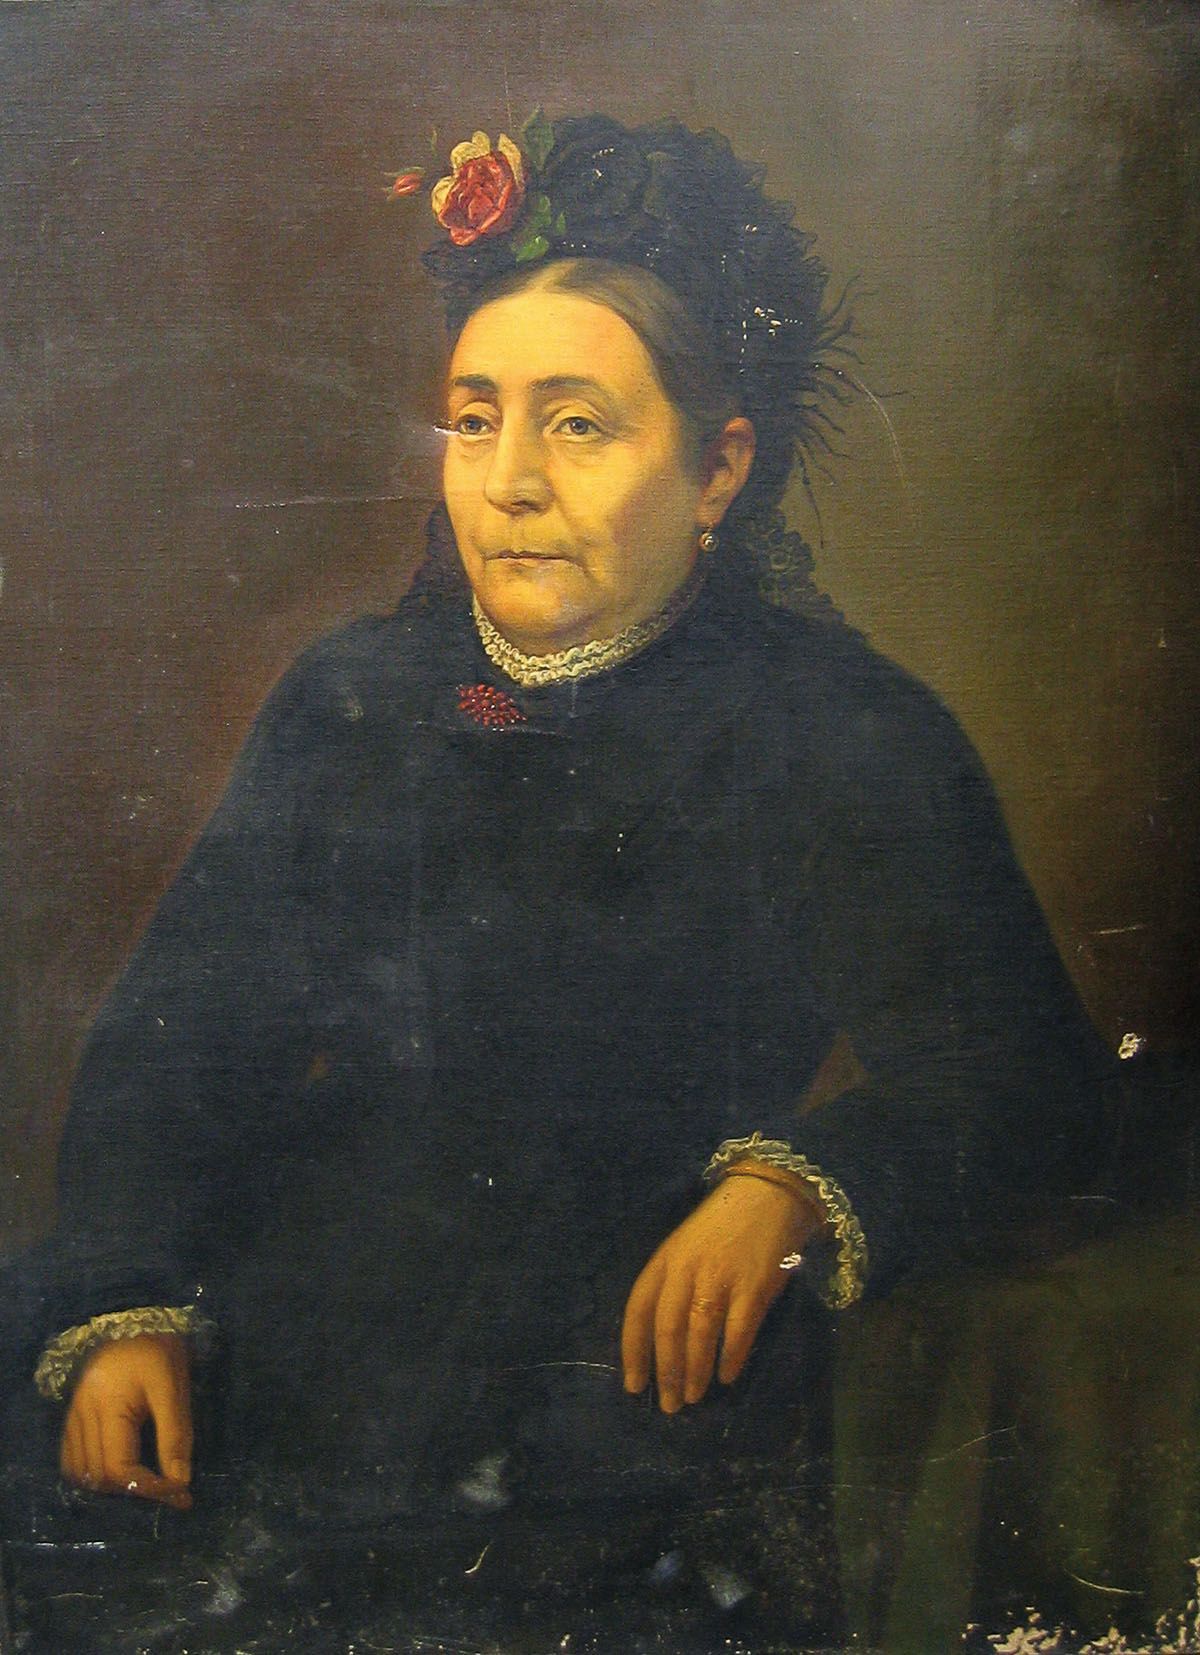 A painted portrait of a woman in a black cloak with a red bow in her hair